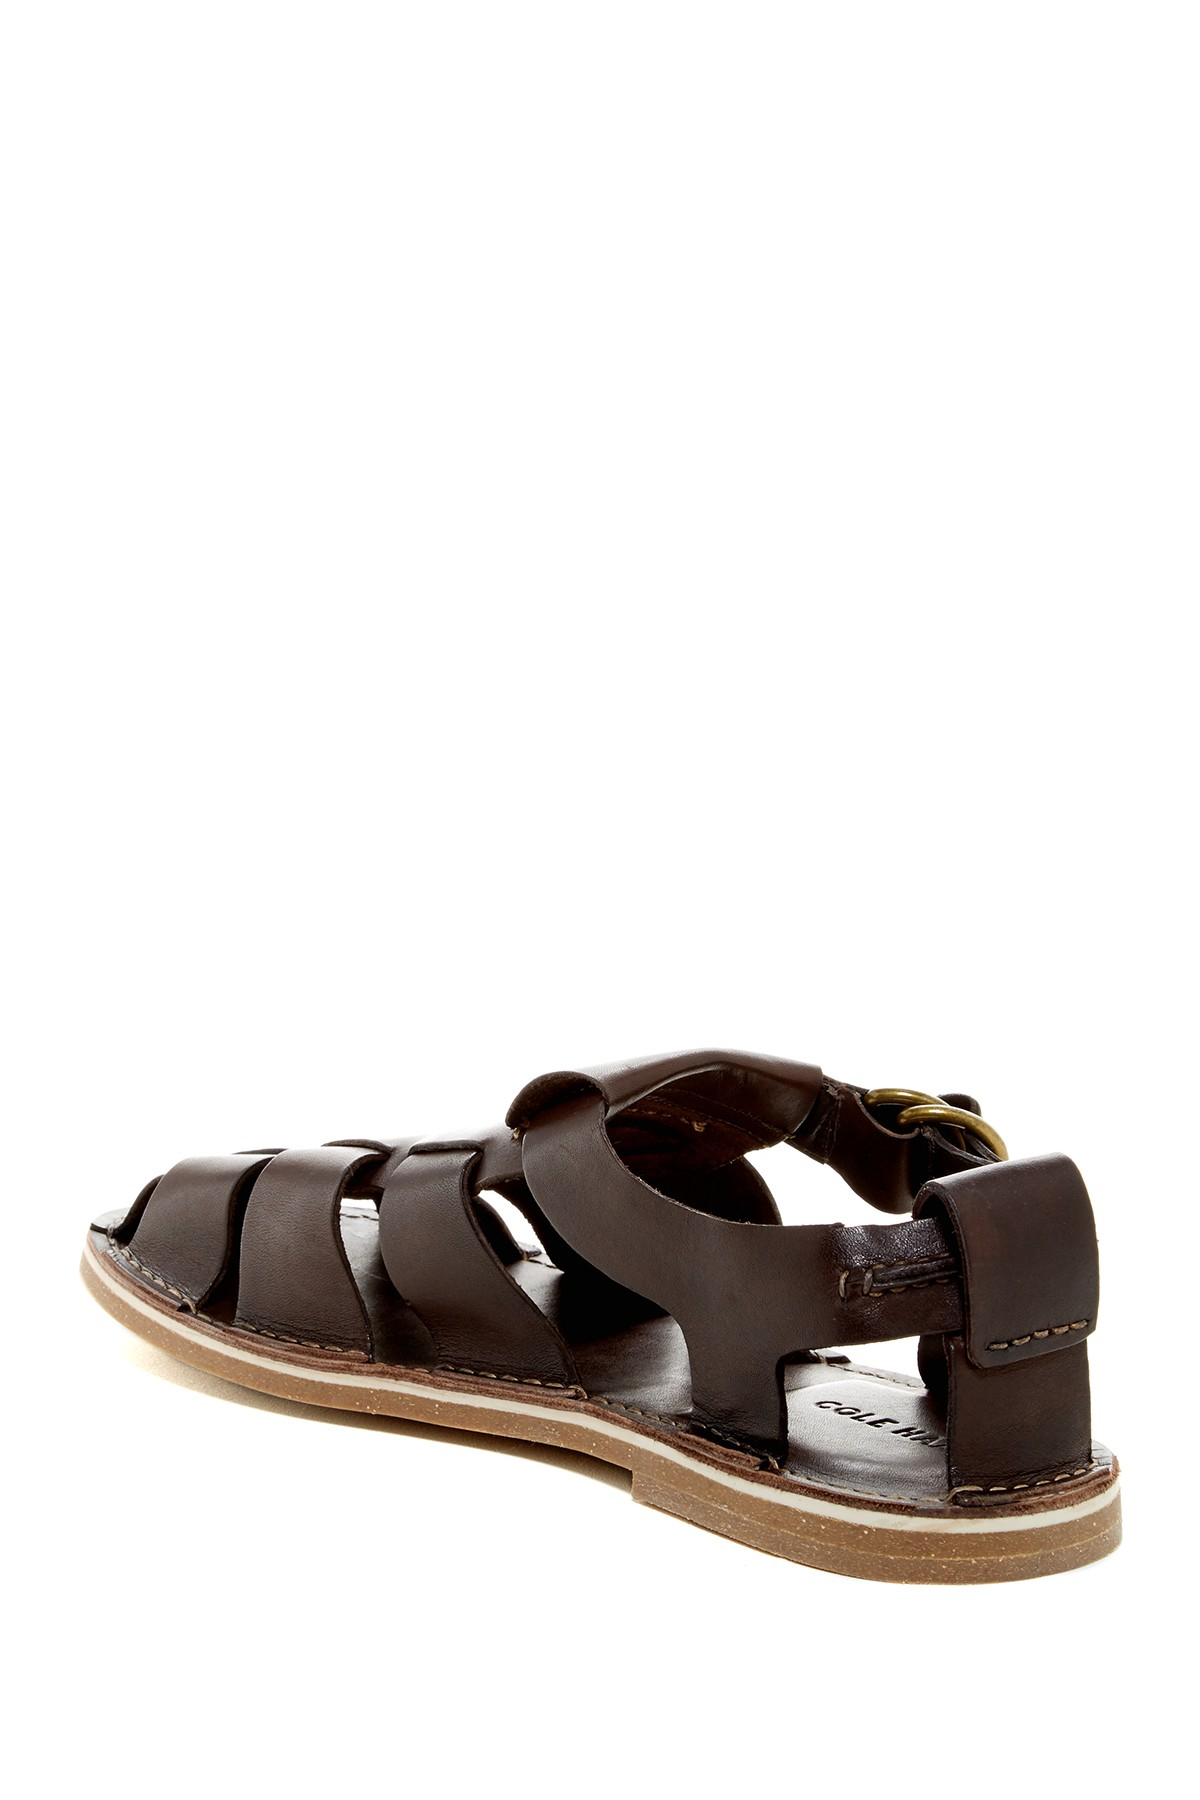 Cole Haan Leather Ginsberg Fisherman Sandal in Chestnut (Brown) for Men ...